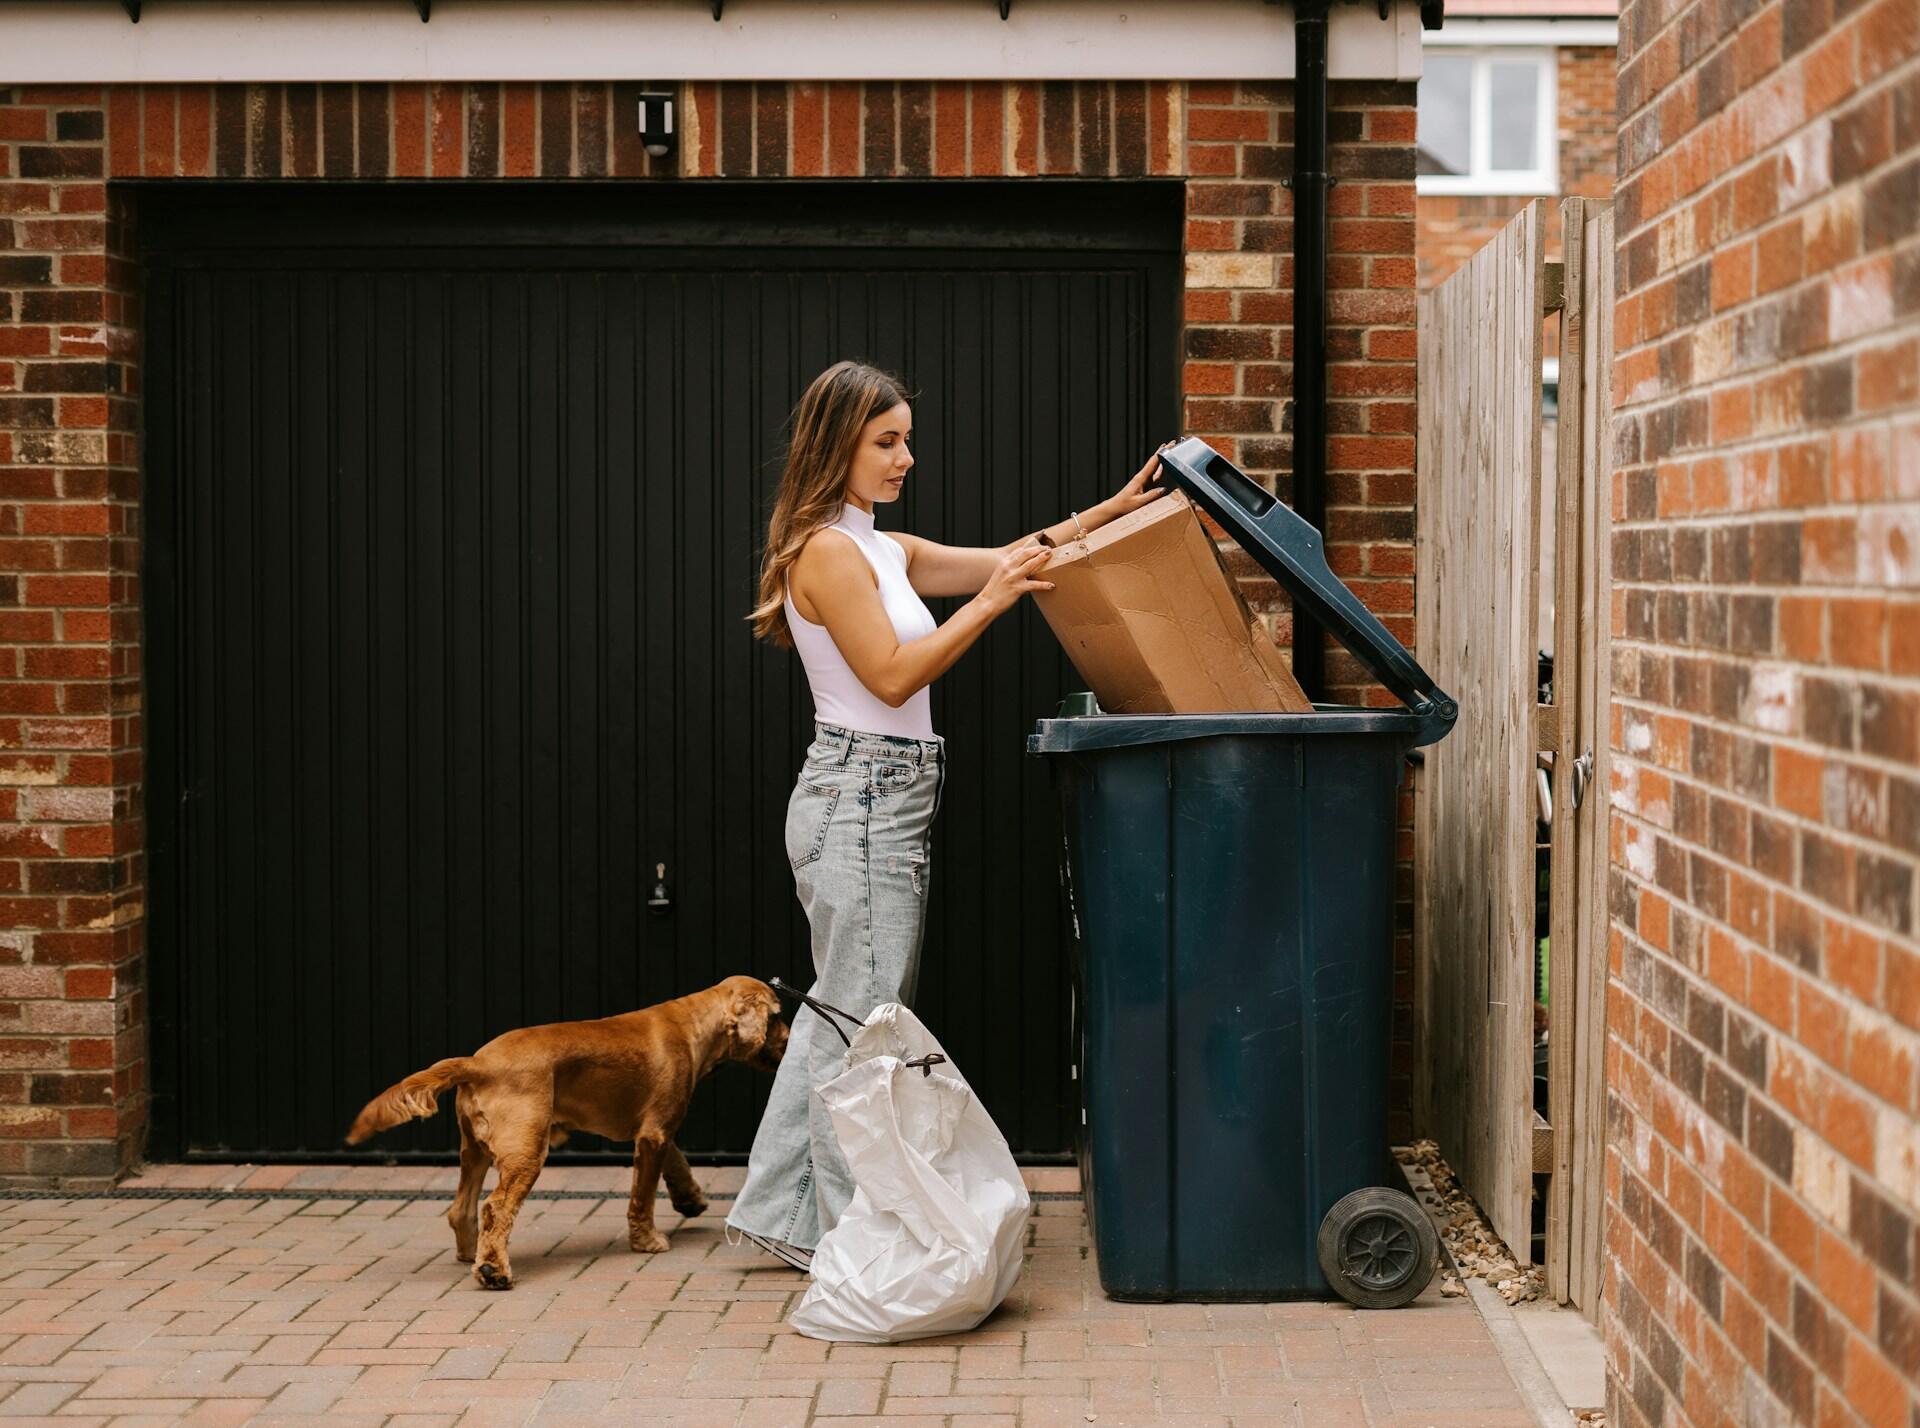 A woman throwing away her trash accompanied by her dog